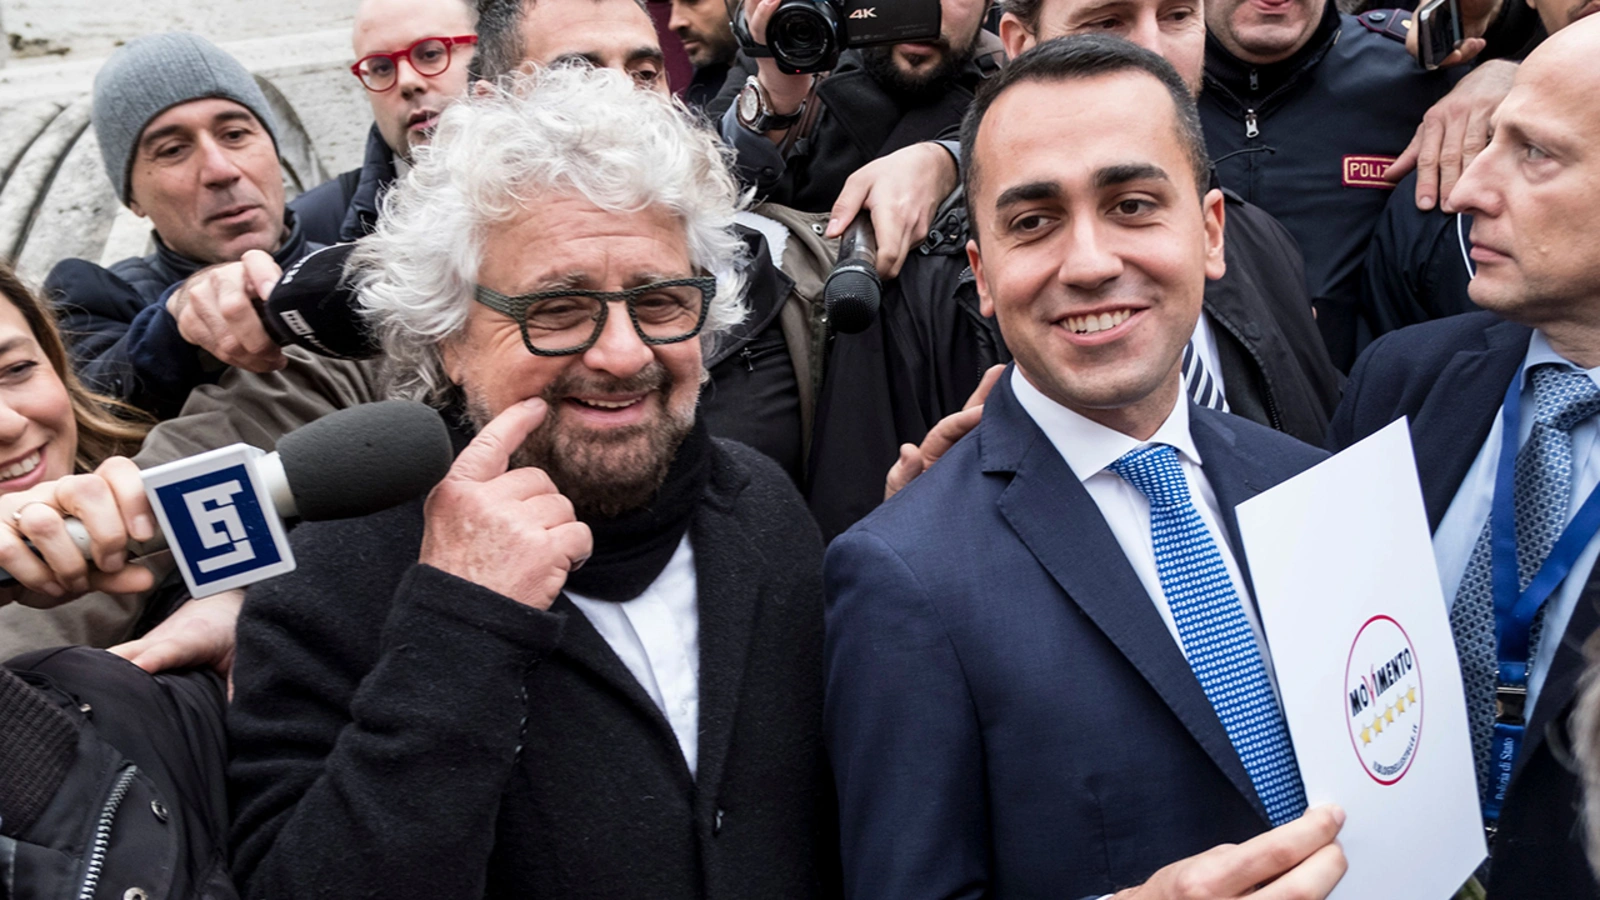 Five Star Movement leader Luigi Di Maio poses with the party's founder, Beppe Grillo, in January 2018.